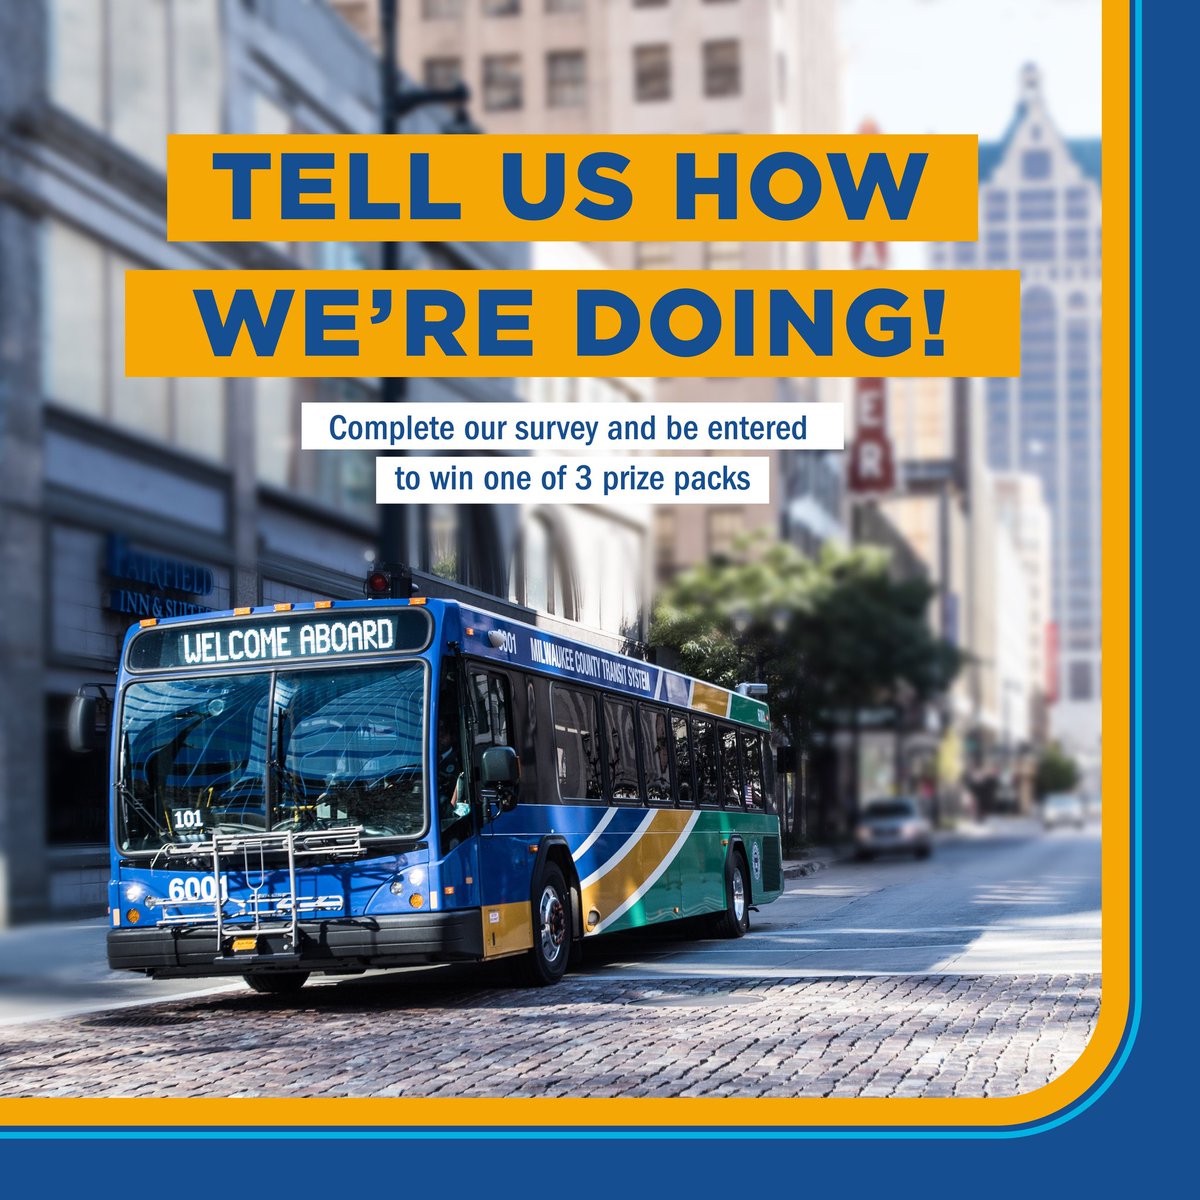 Don't forget to fill out our spring Customer Survey! There's still time! Check it out for your chance to win one of three MCTS prize packs! RideMCTS.com/SpringSurvey